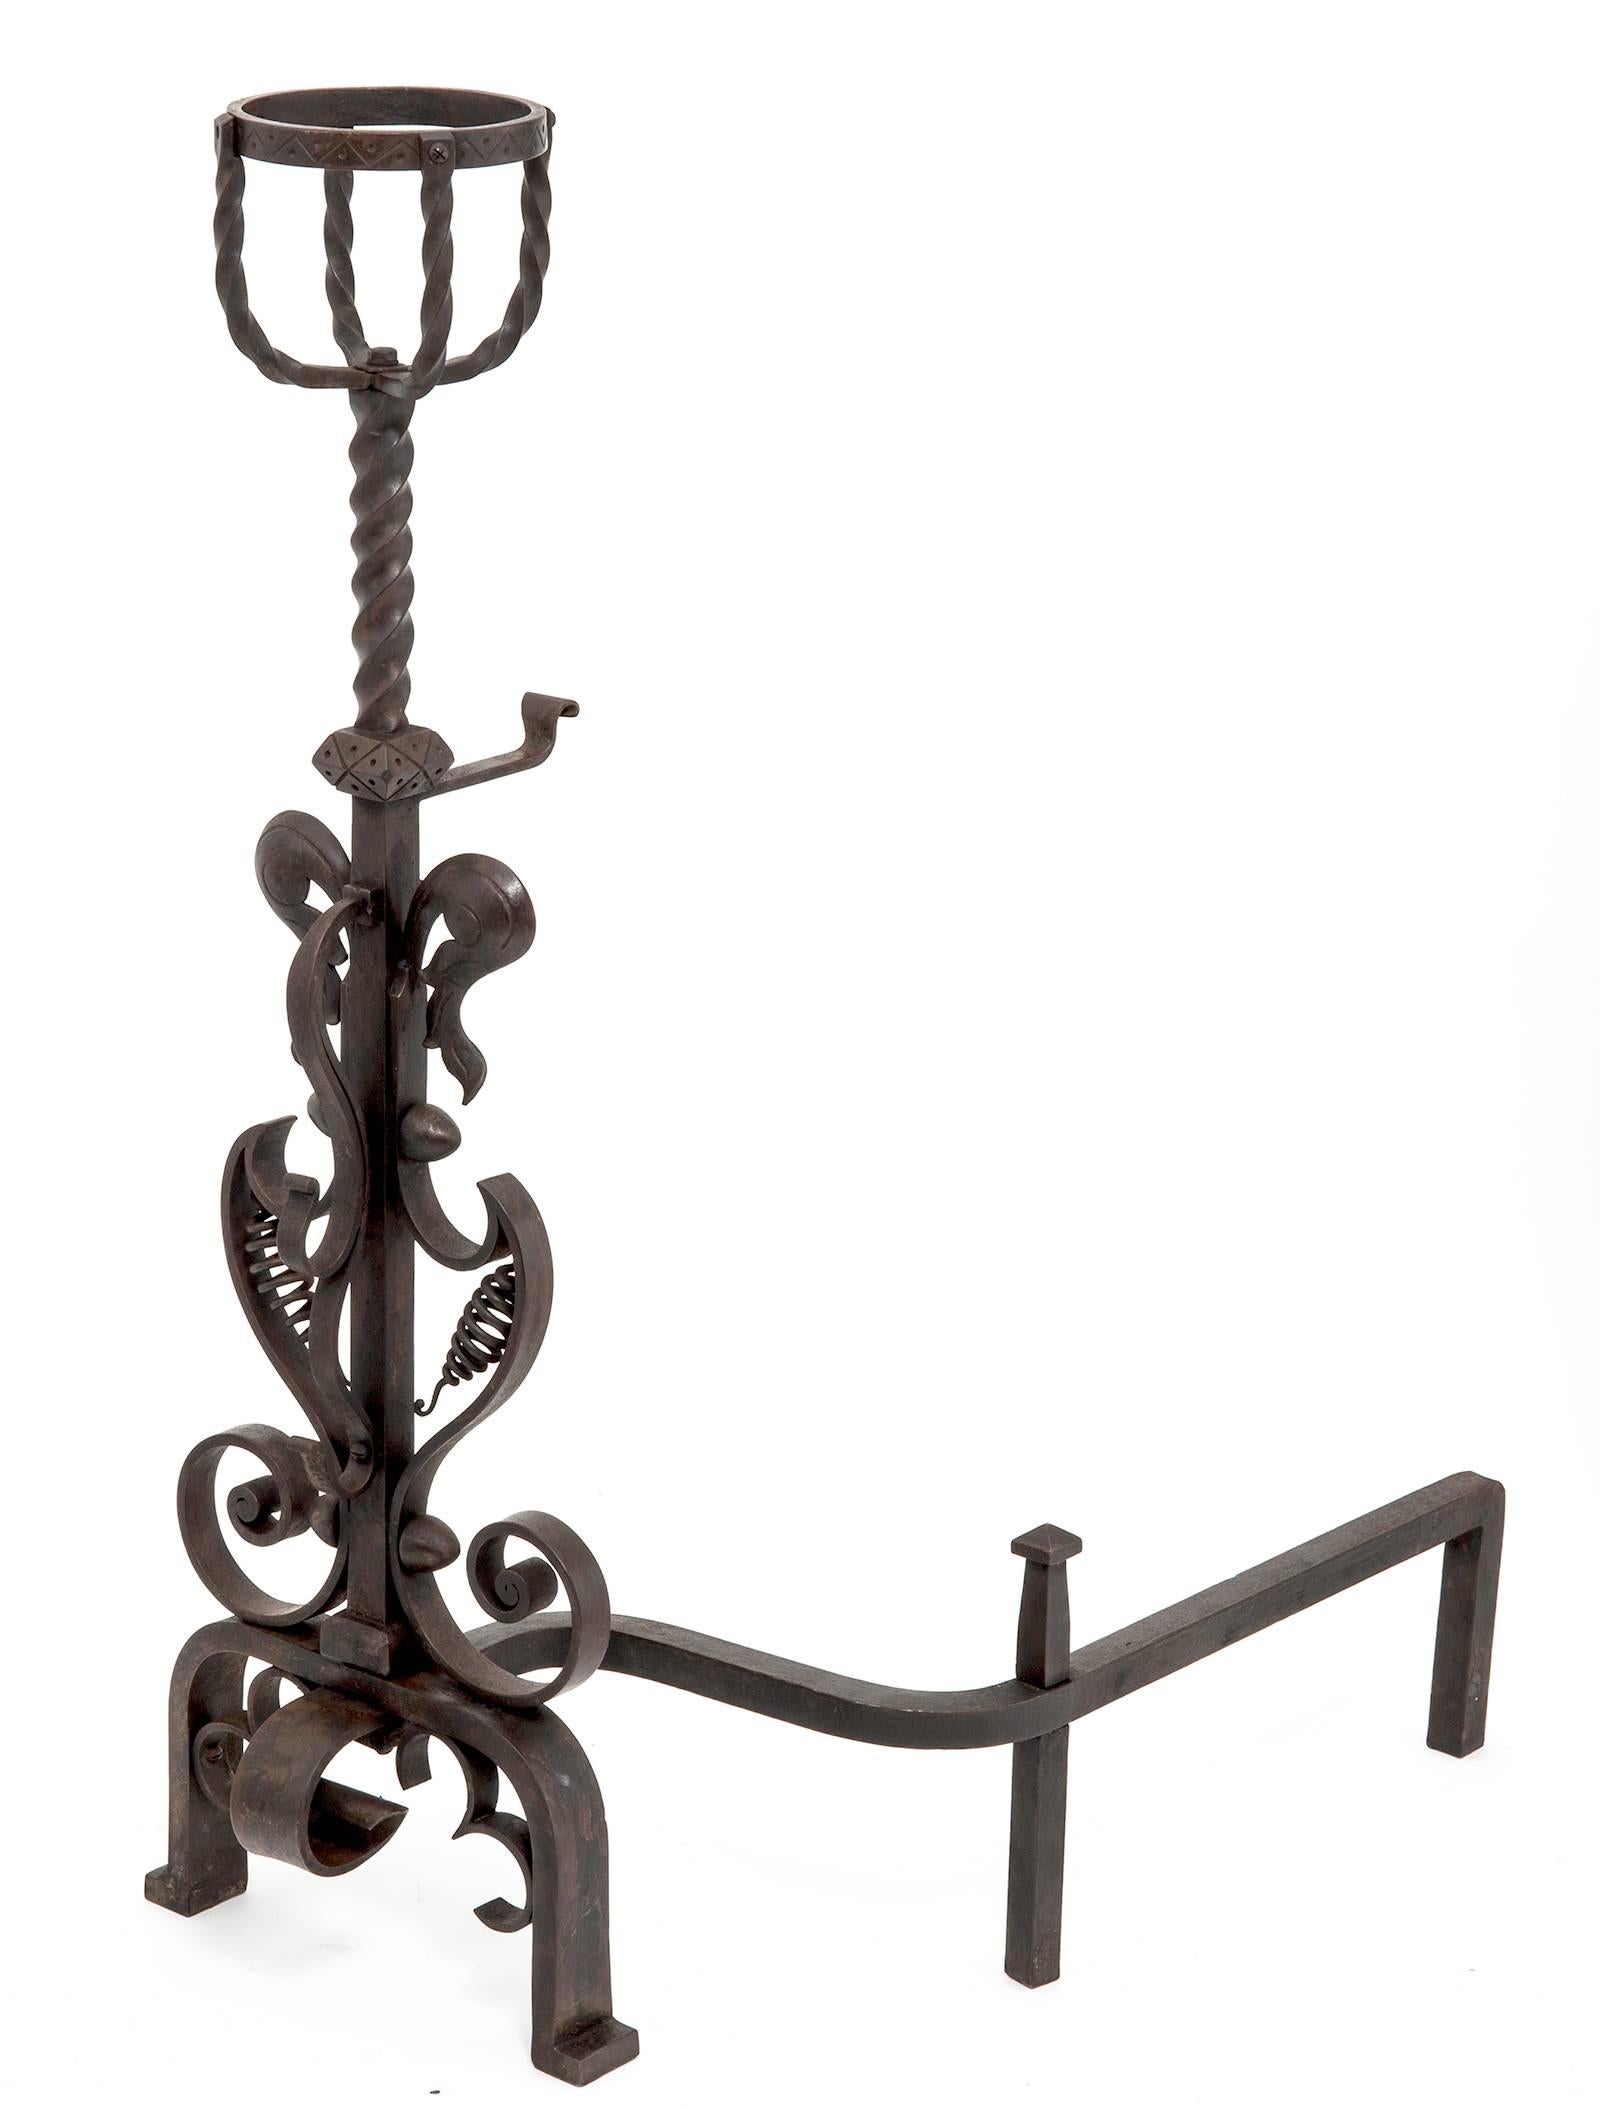 Outstanding craftsmanship on this pair of hand-wrought iron andirons.
Interestingly elegant design topped with pot holders.
In excellent condition.
 